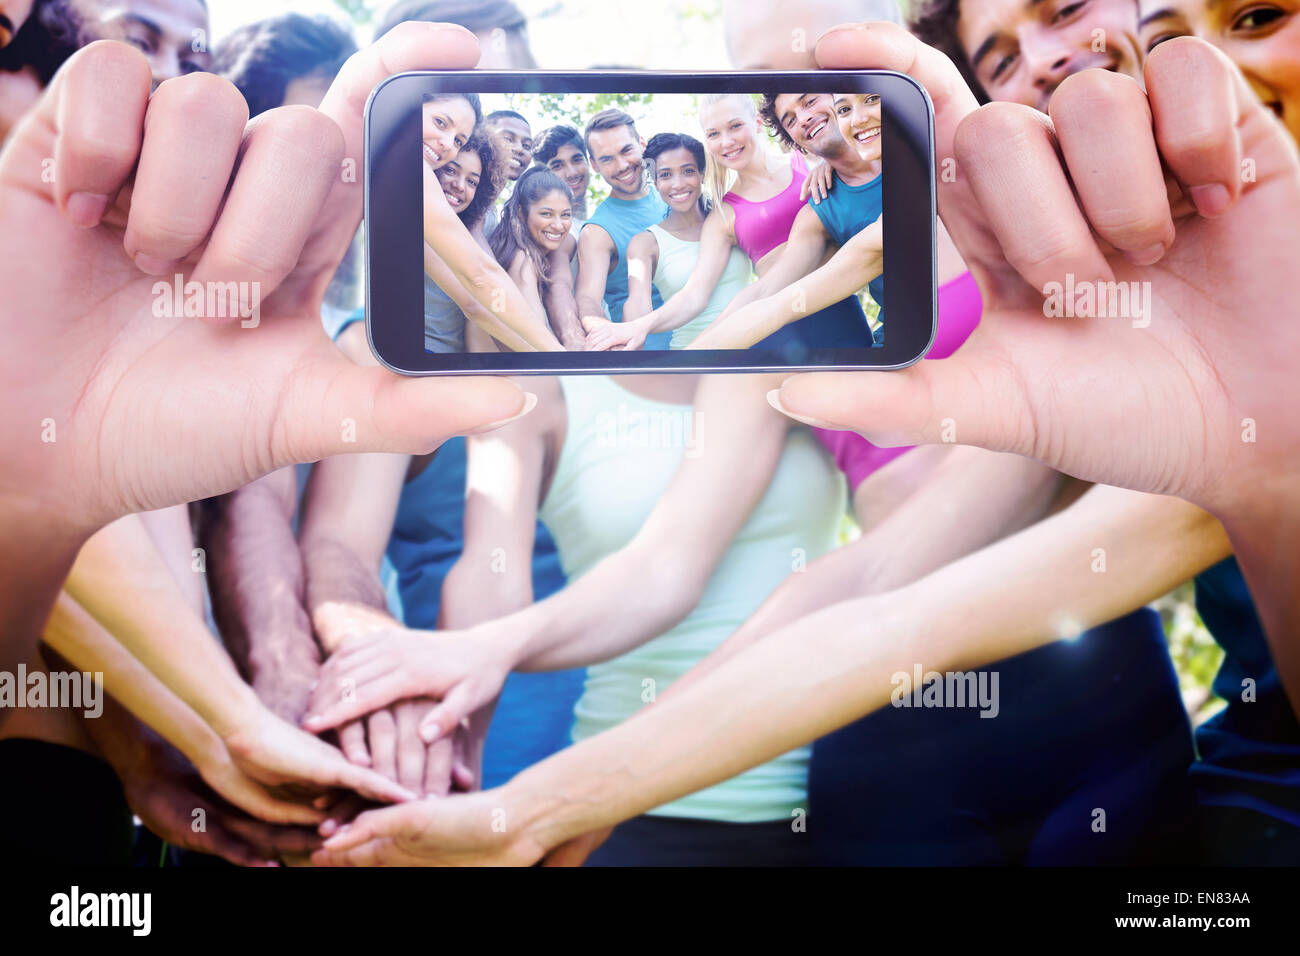 Composite image of hand holding smartphone showing Stock Photo